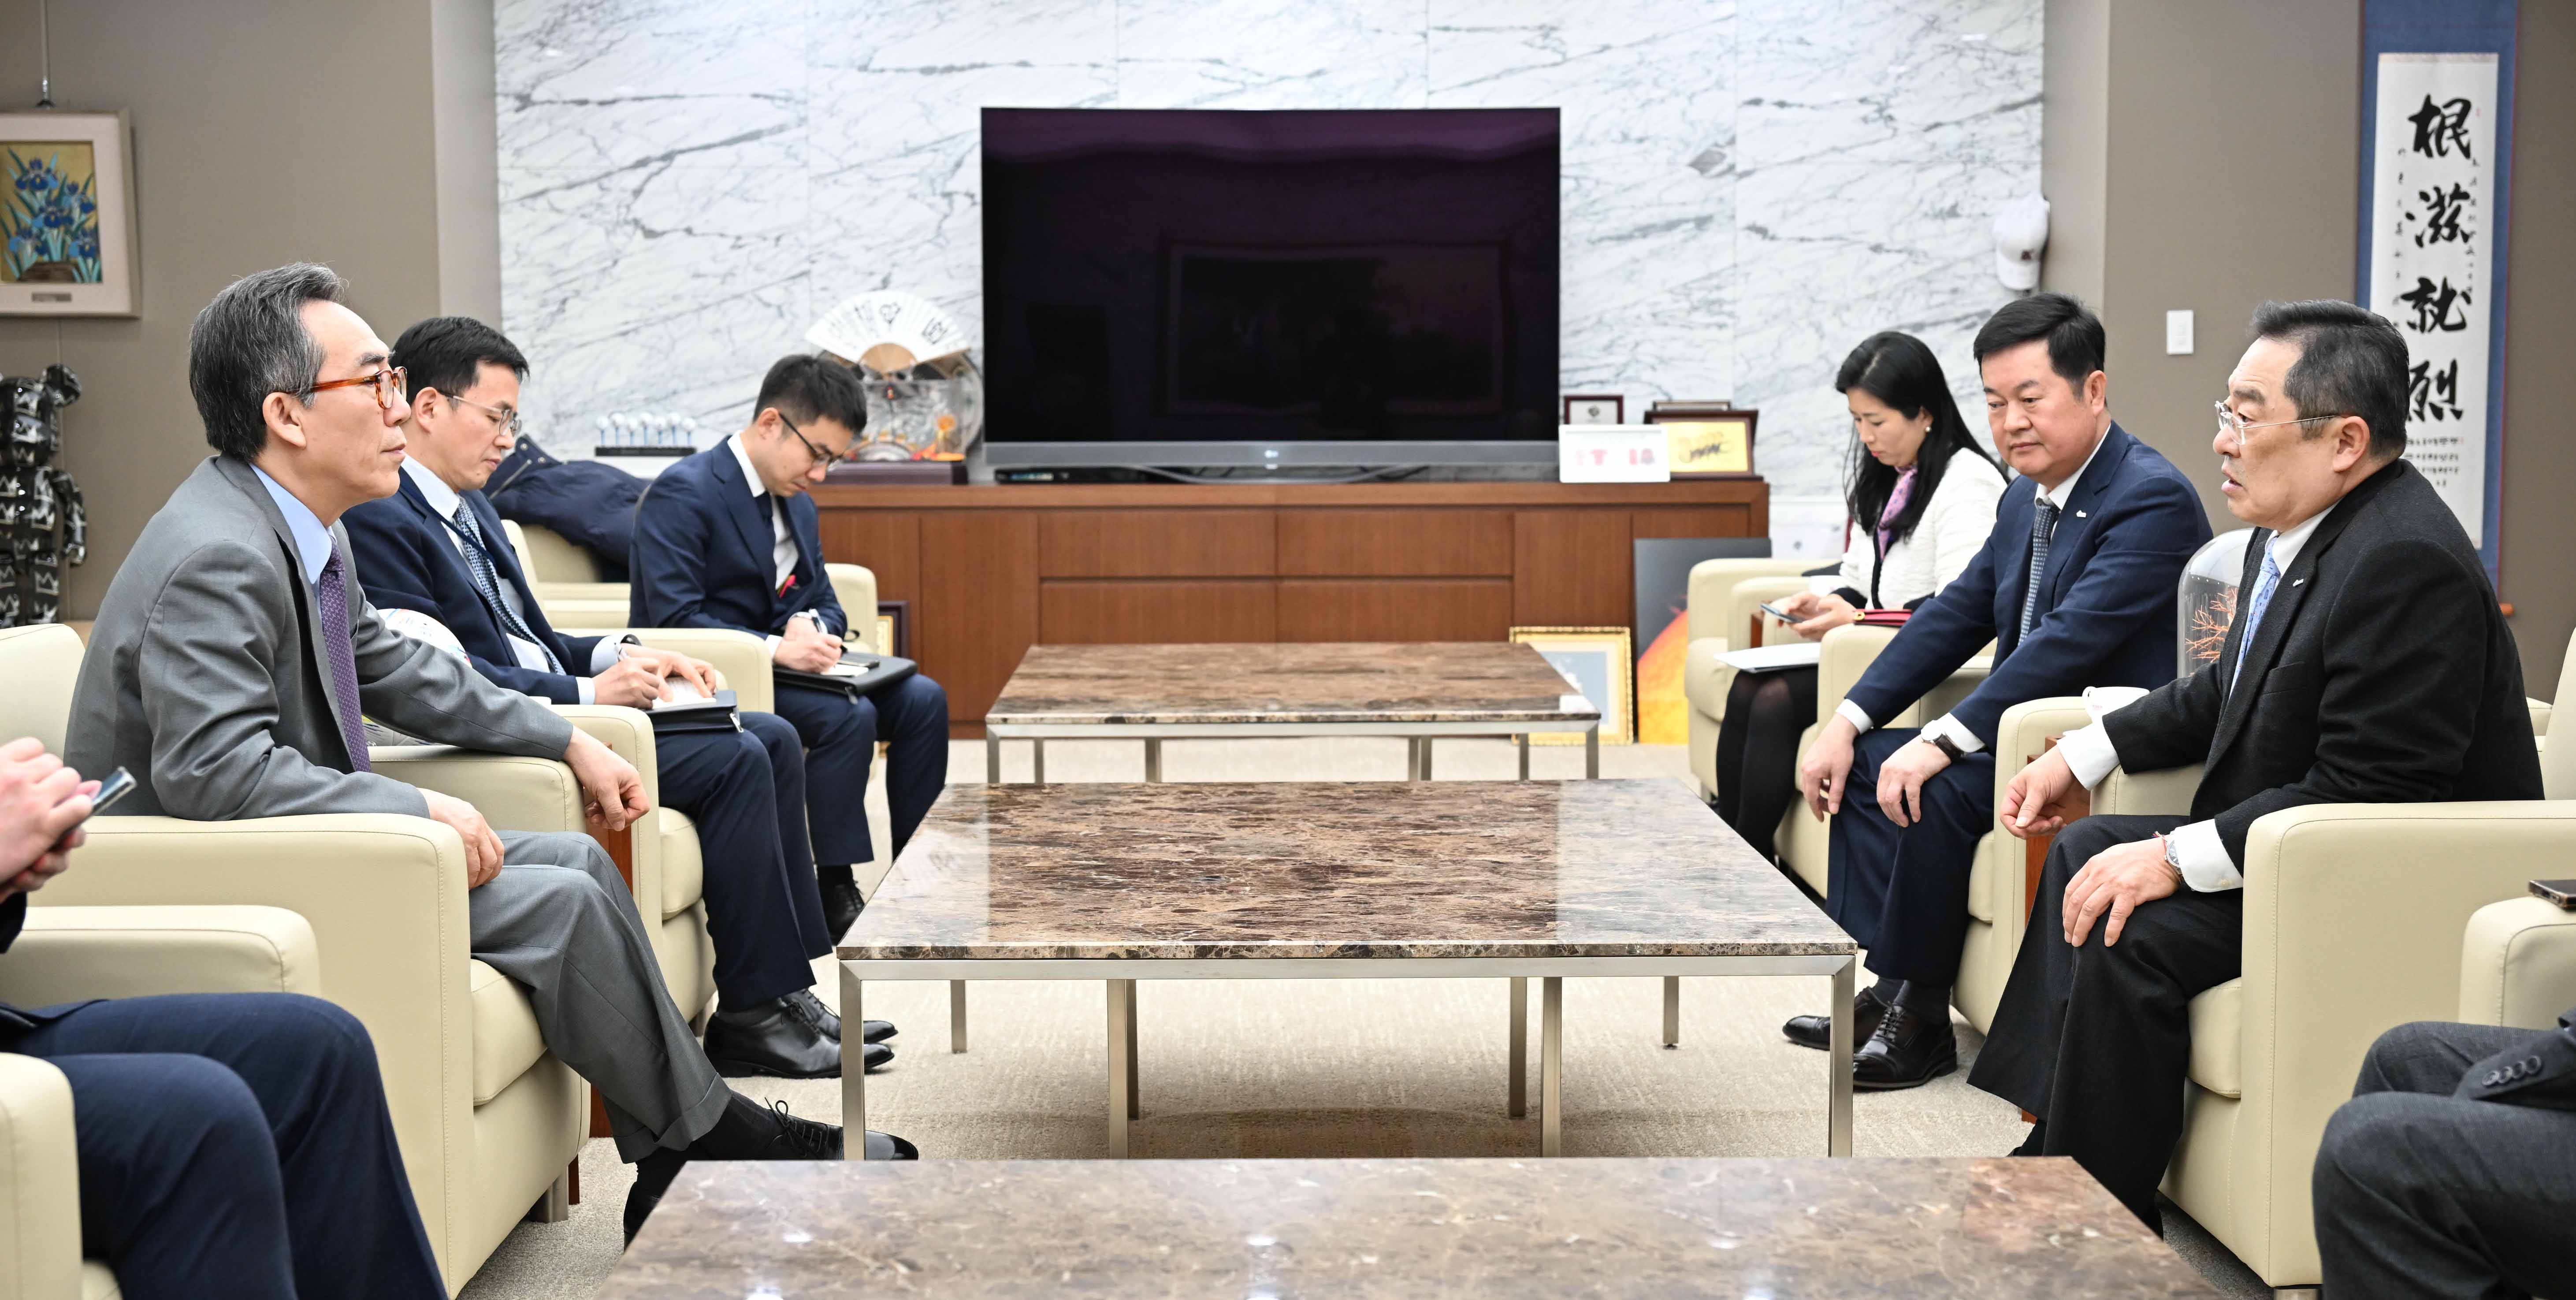 Ministry of Foreign Affairs Joins Hands Together to Boost Exports - Foreign Minister Cho Meets with Chairman of Korea International Trade Association (KITA)